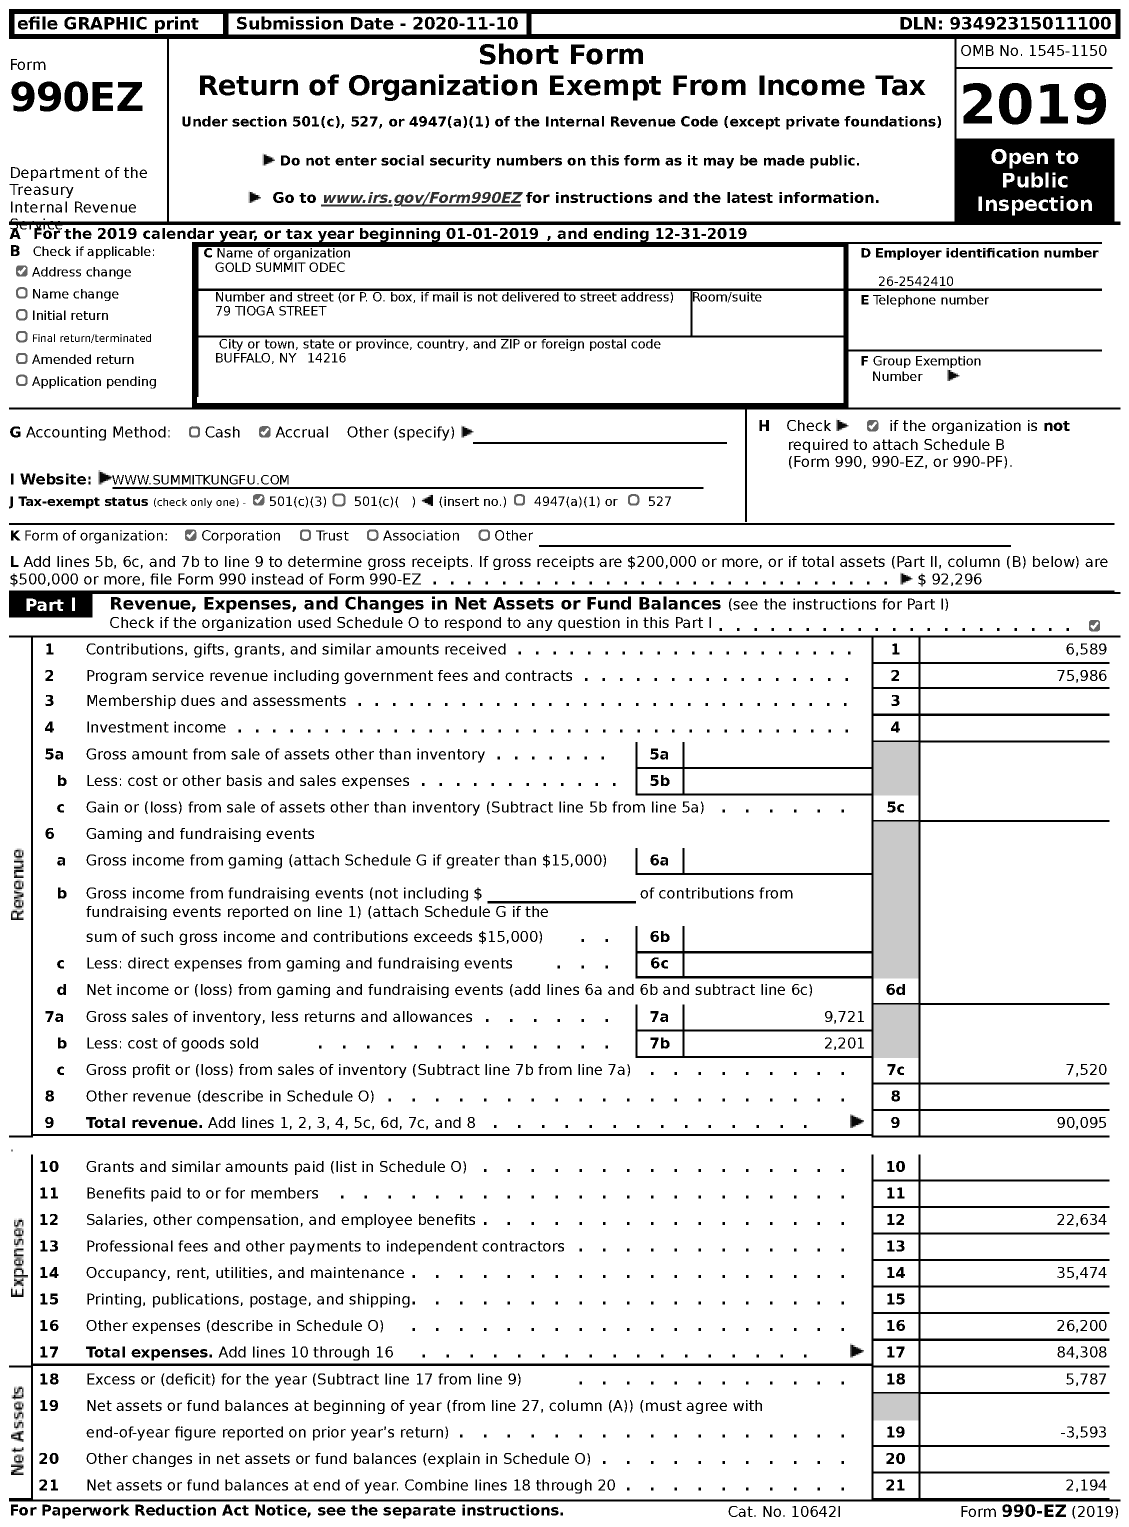 Image of first page of 2019 Form 990EZ for Gold Summit Odec